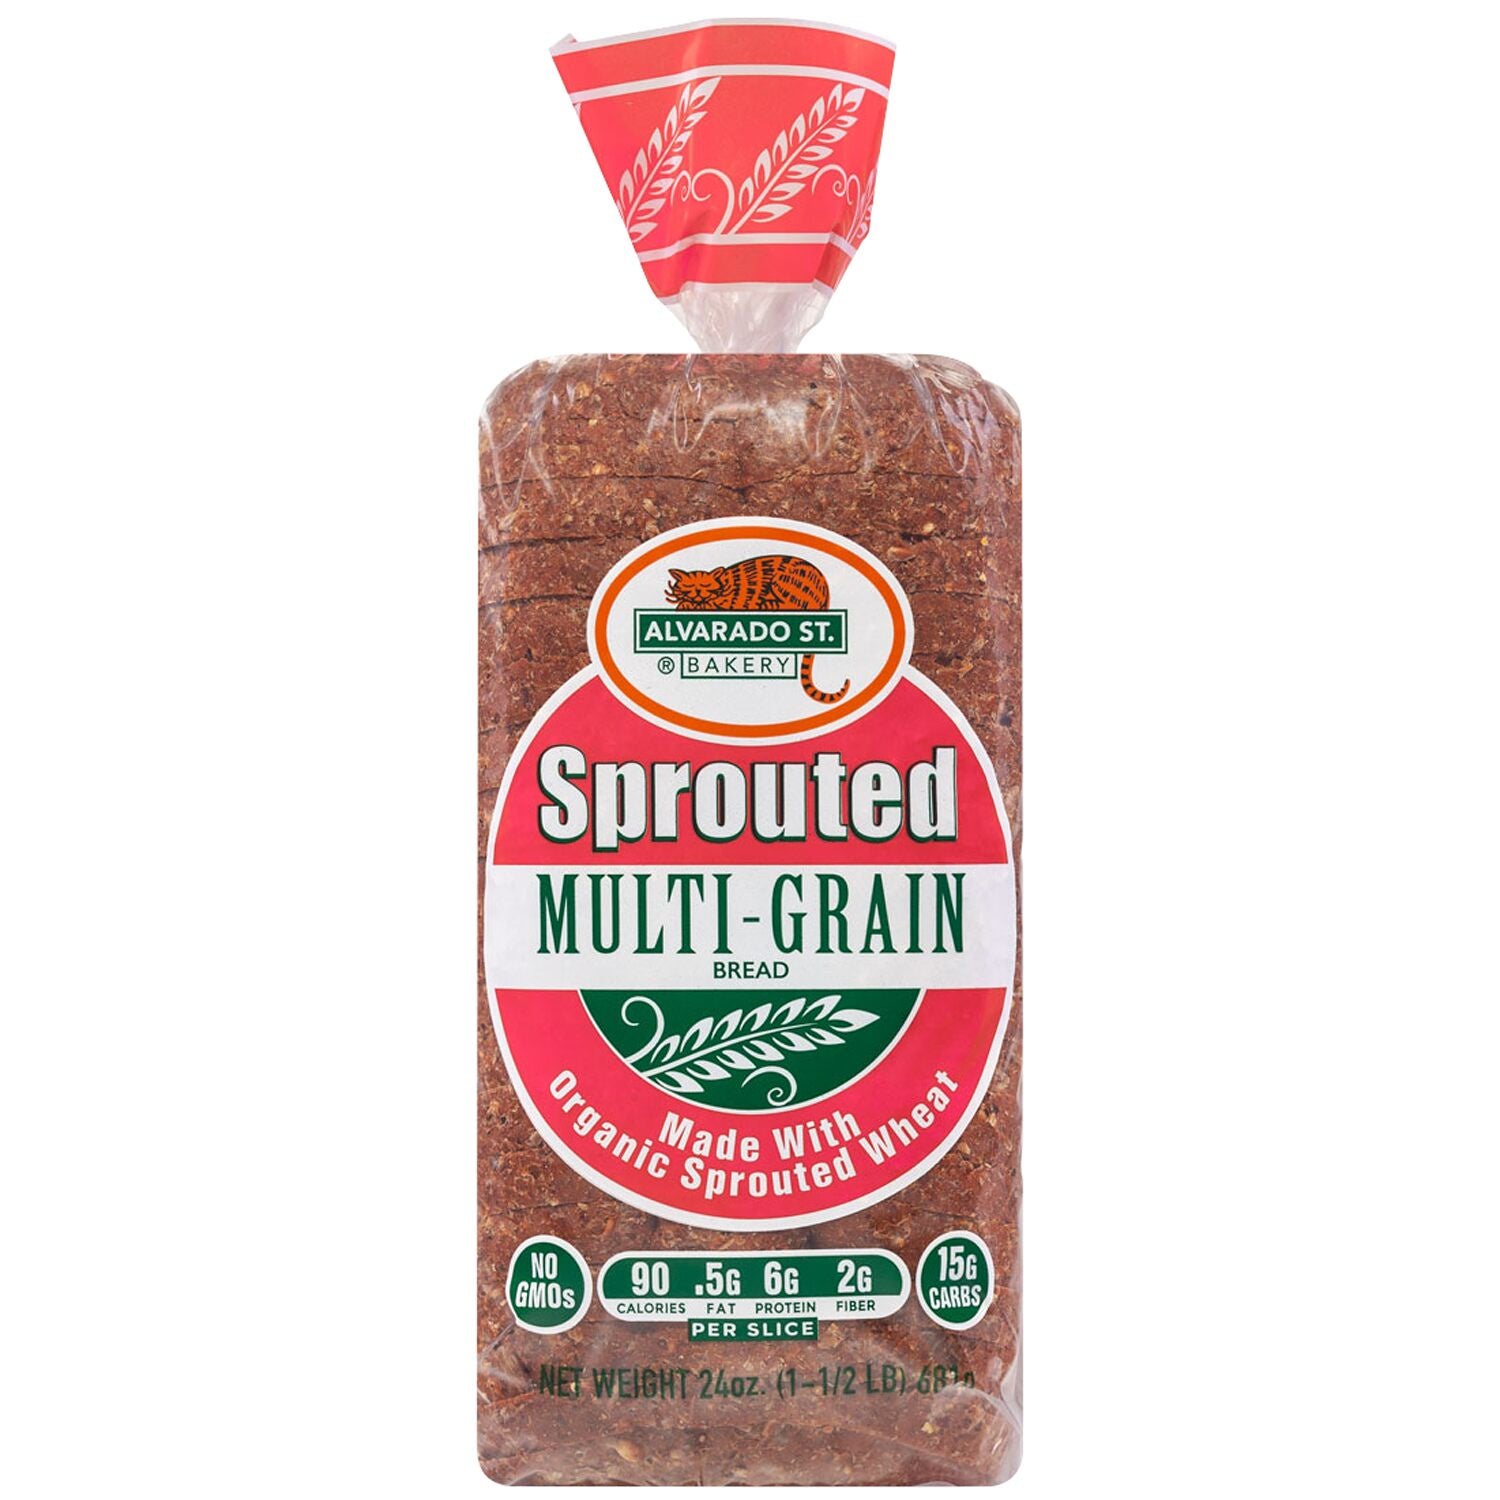 Alvarado Street Bakery Sprouted Multi-Grain Bread Made with 100% Whole Grains, Frozen 24oz